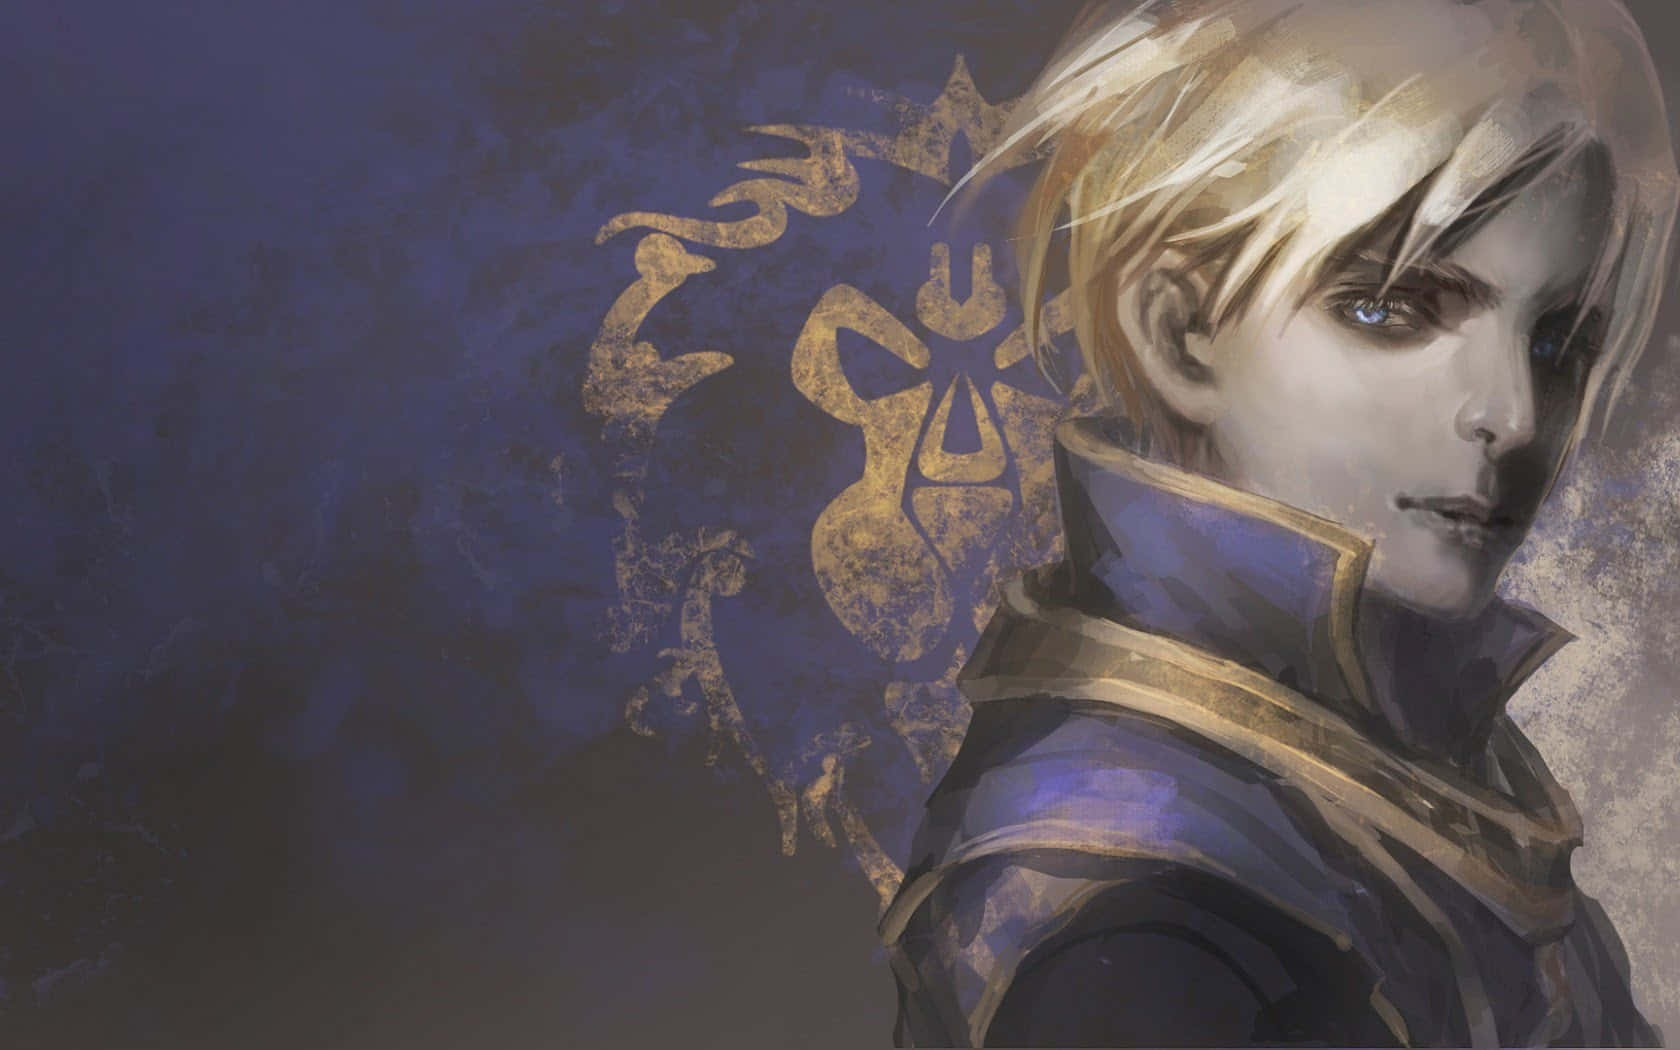 Anduin Wrynn, The High King Of The Alliance, In Deep Thought On The Battlefield. Wallpaper